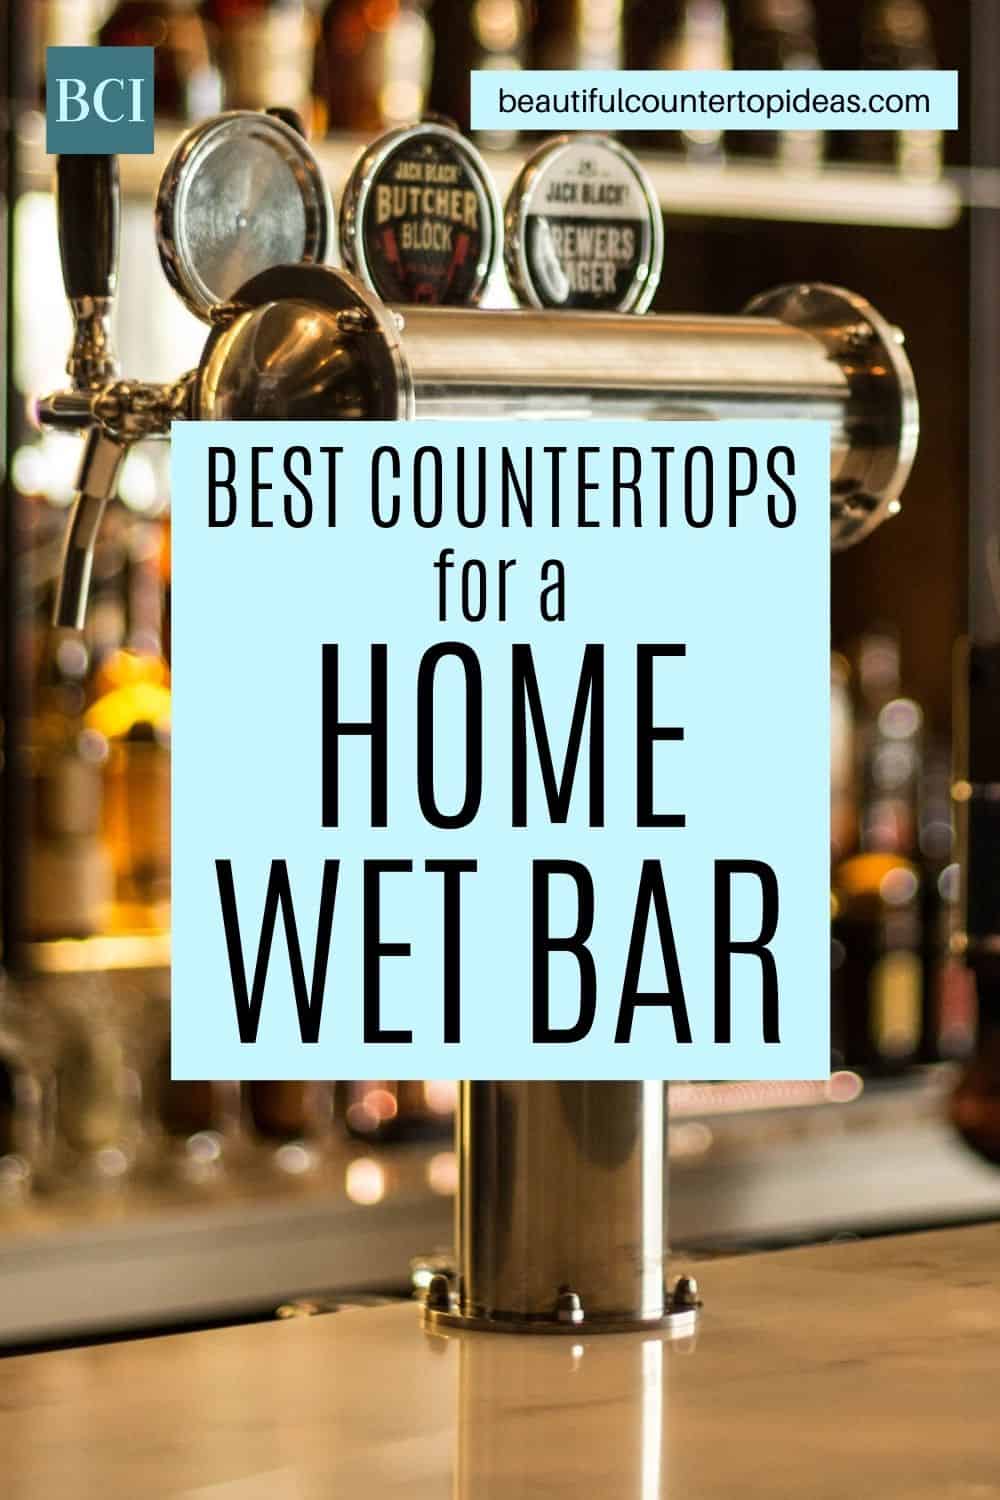 Explore our top five options for a home wet bar countertop. These beautiful, durable, and easy to care for choices are perfect for your home bar.